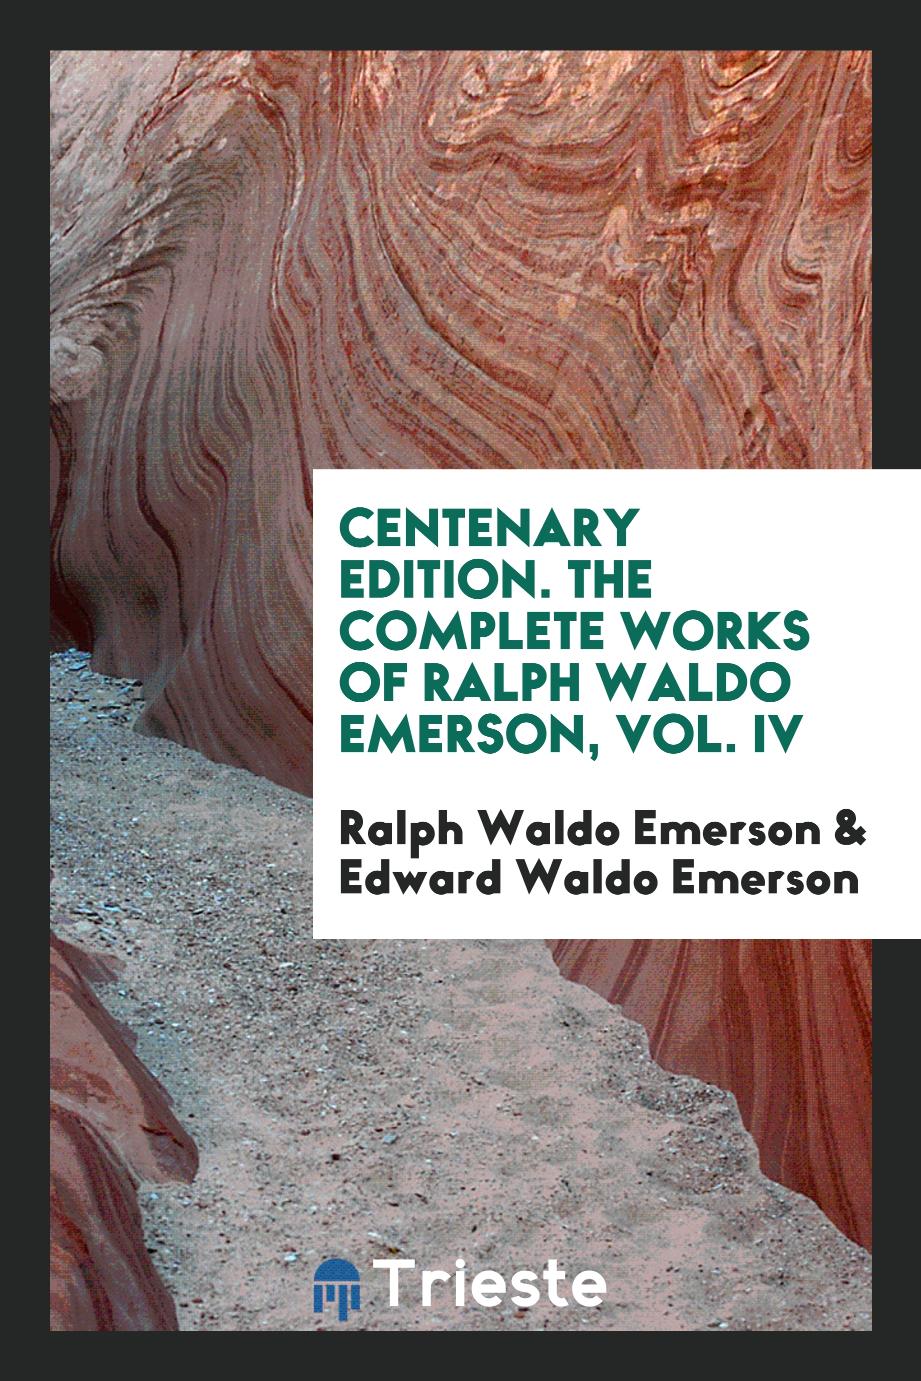 Centenary Edition. The Complete Works of Ralph Waldo Emerson, Vol. IV